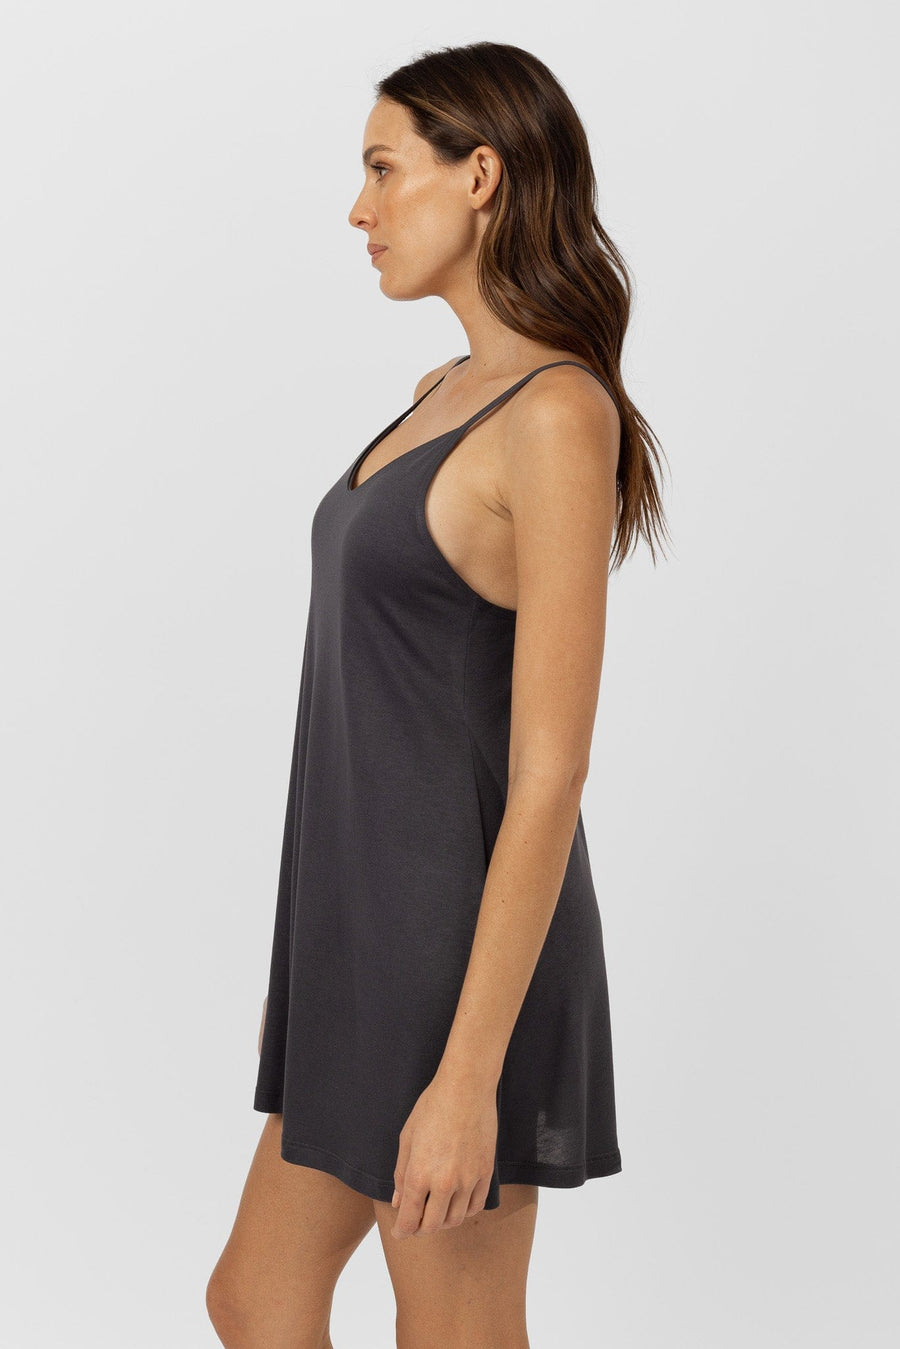 Willow Dress | Graphite Nightgowns Australia Online | Reverie the Label  DRESSES Willow Dress